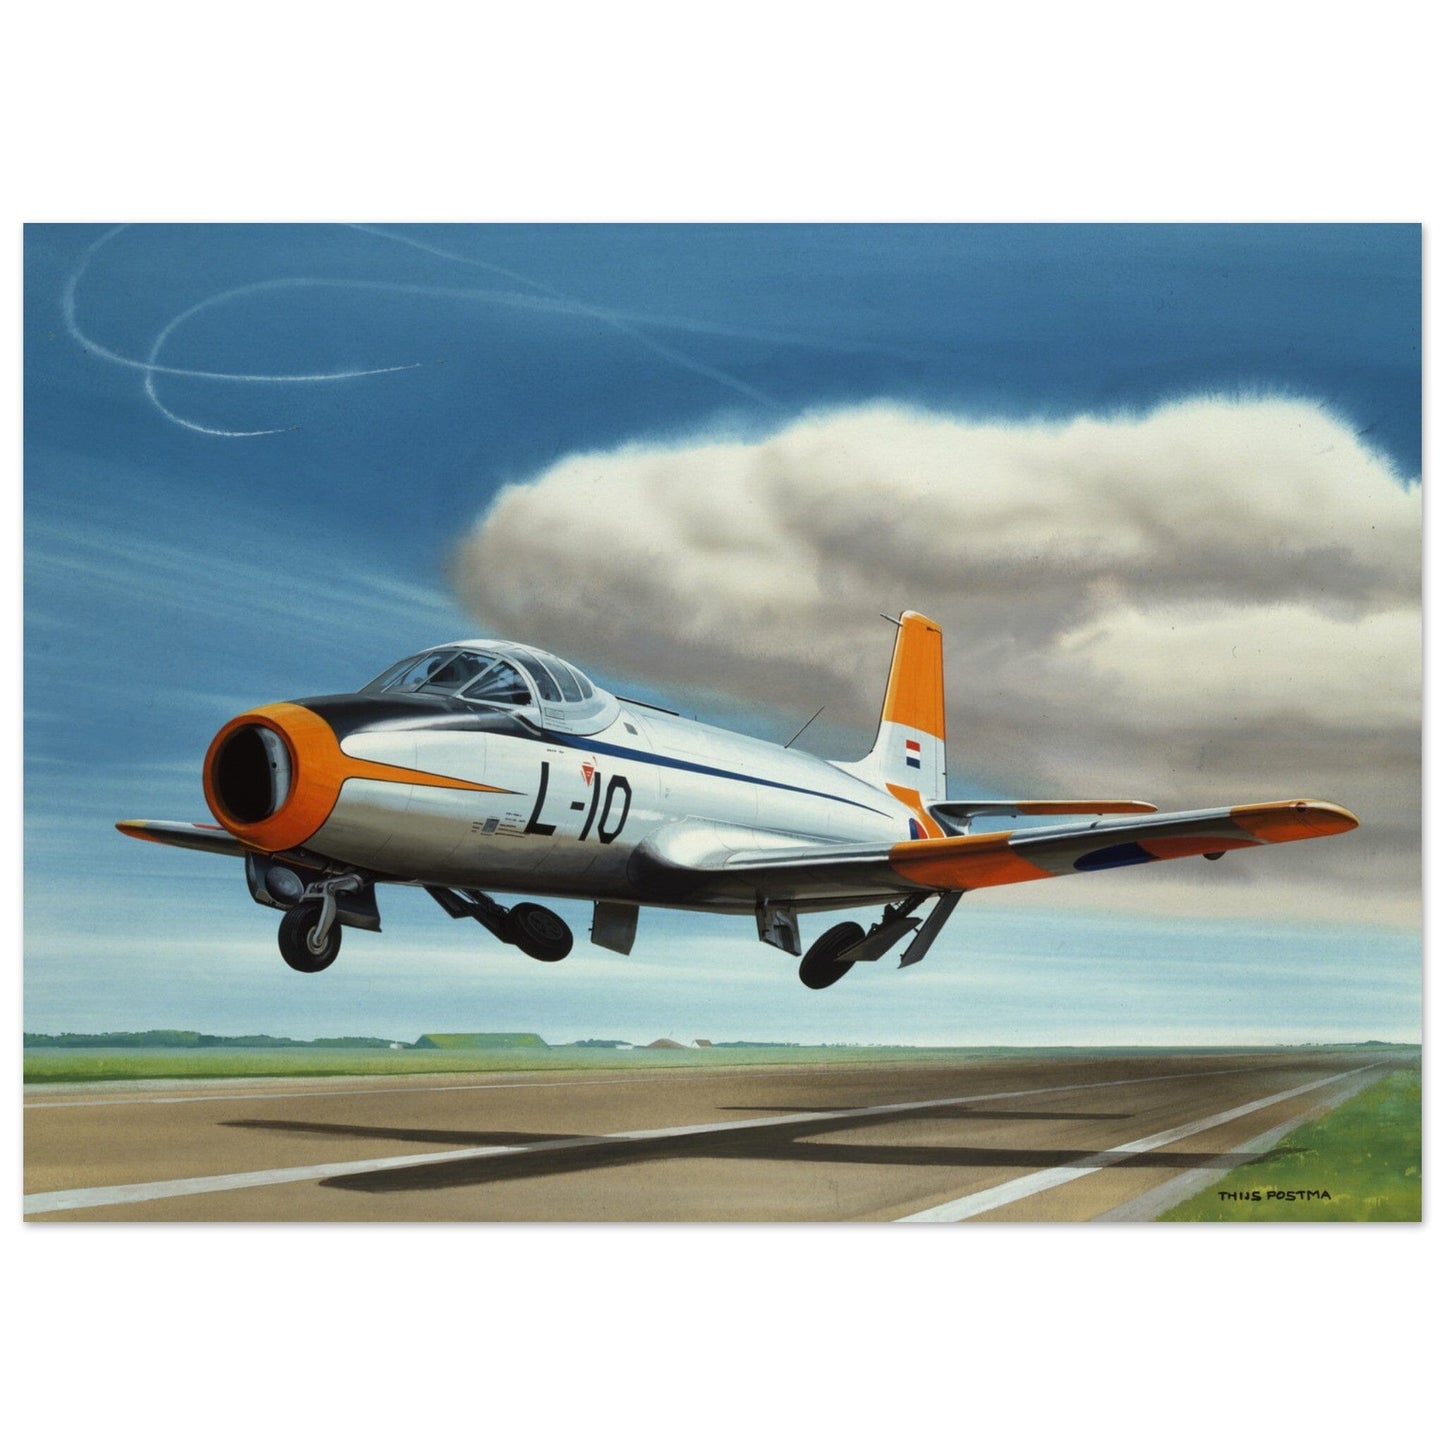 Thijs Postma - Poster - Fokker S-14 Mach Trainer Poster Only TP Aviation Art 50x70 cm / 20x28″ 